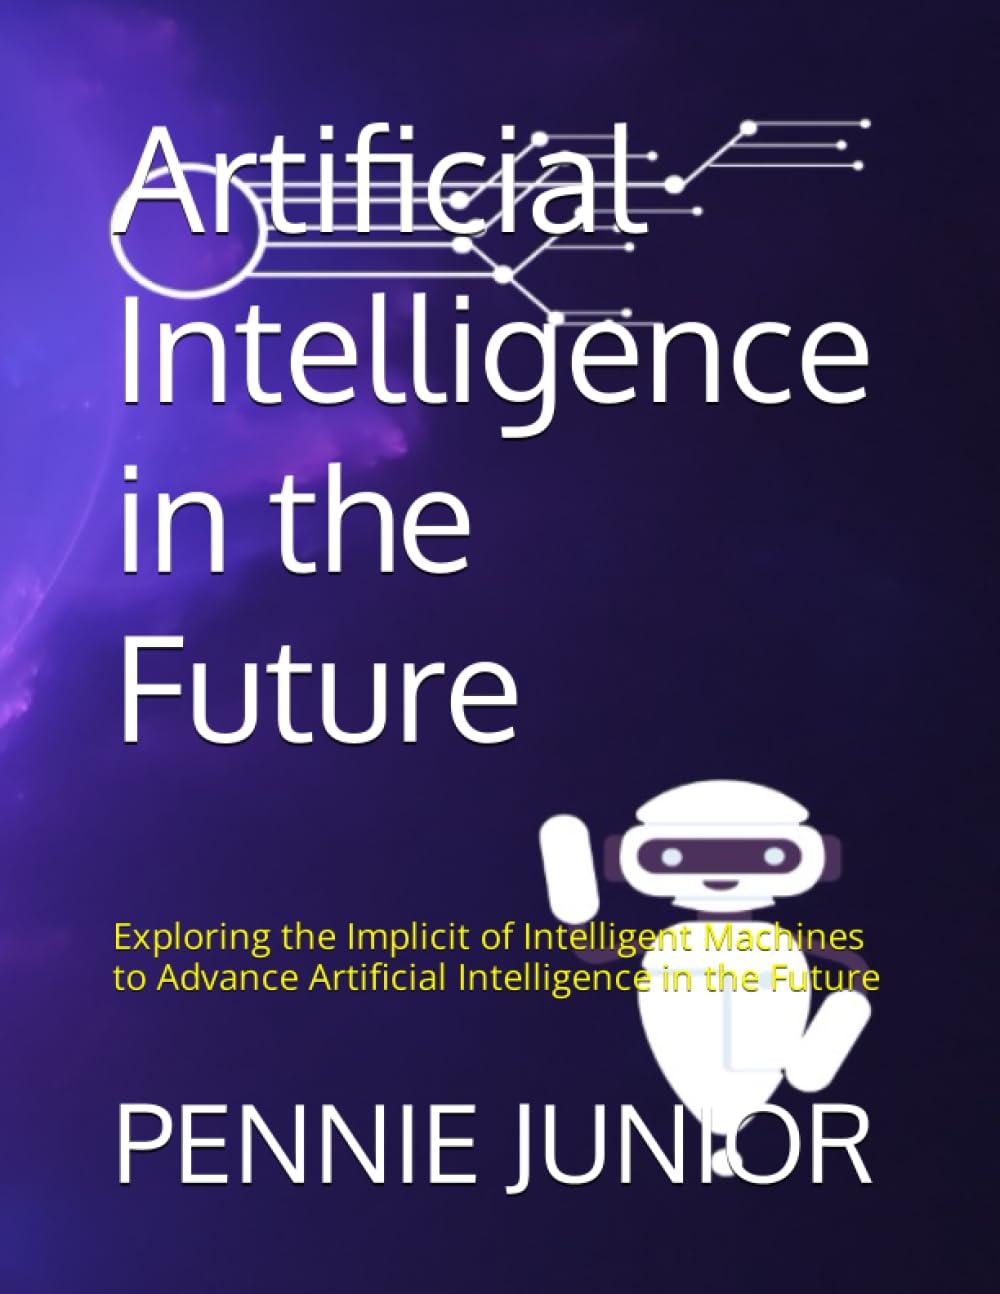 artificial intelligence in the future exploring the implicit of intelligent machines to advance artificial